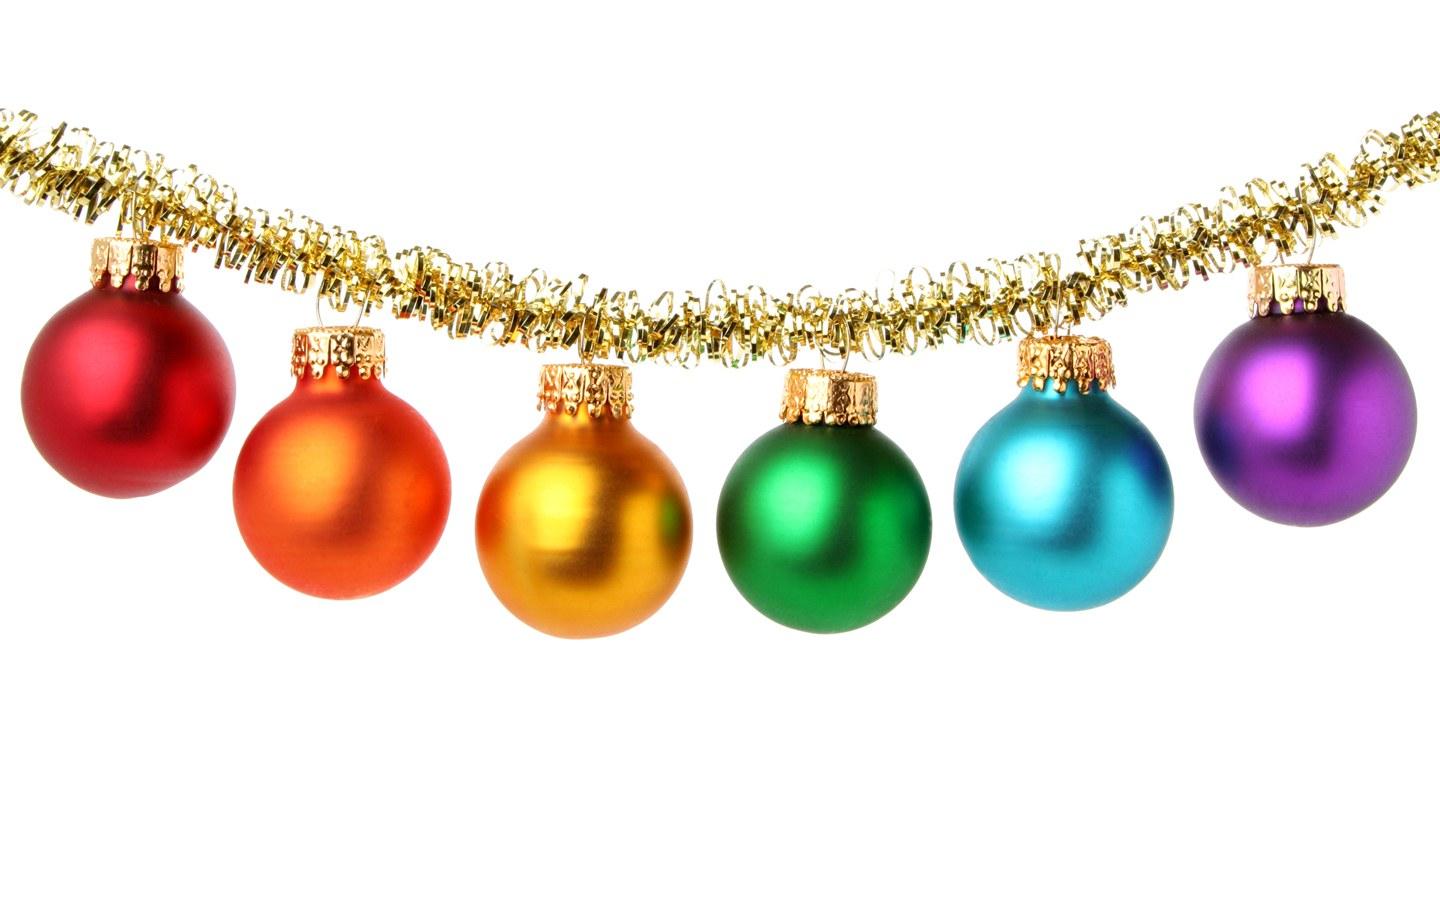 Free Christmas Decorations Picture, Download Free Clip Art